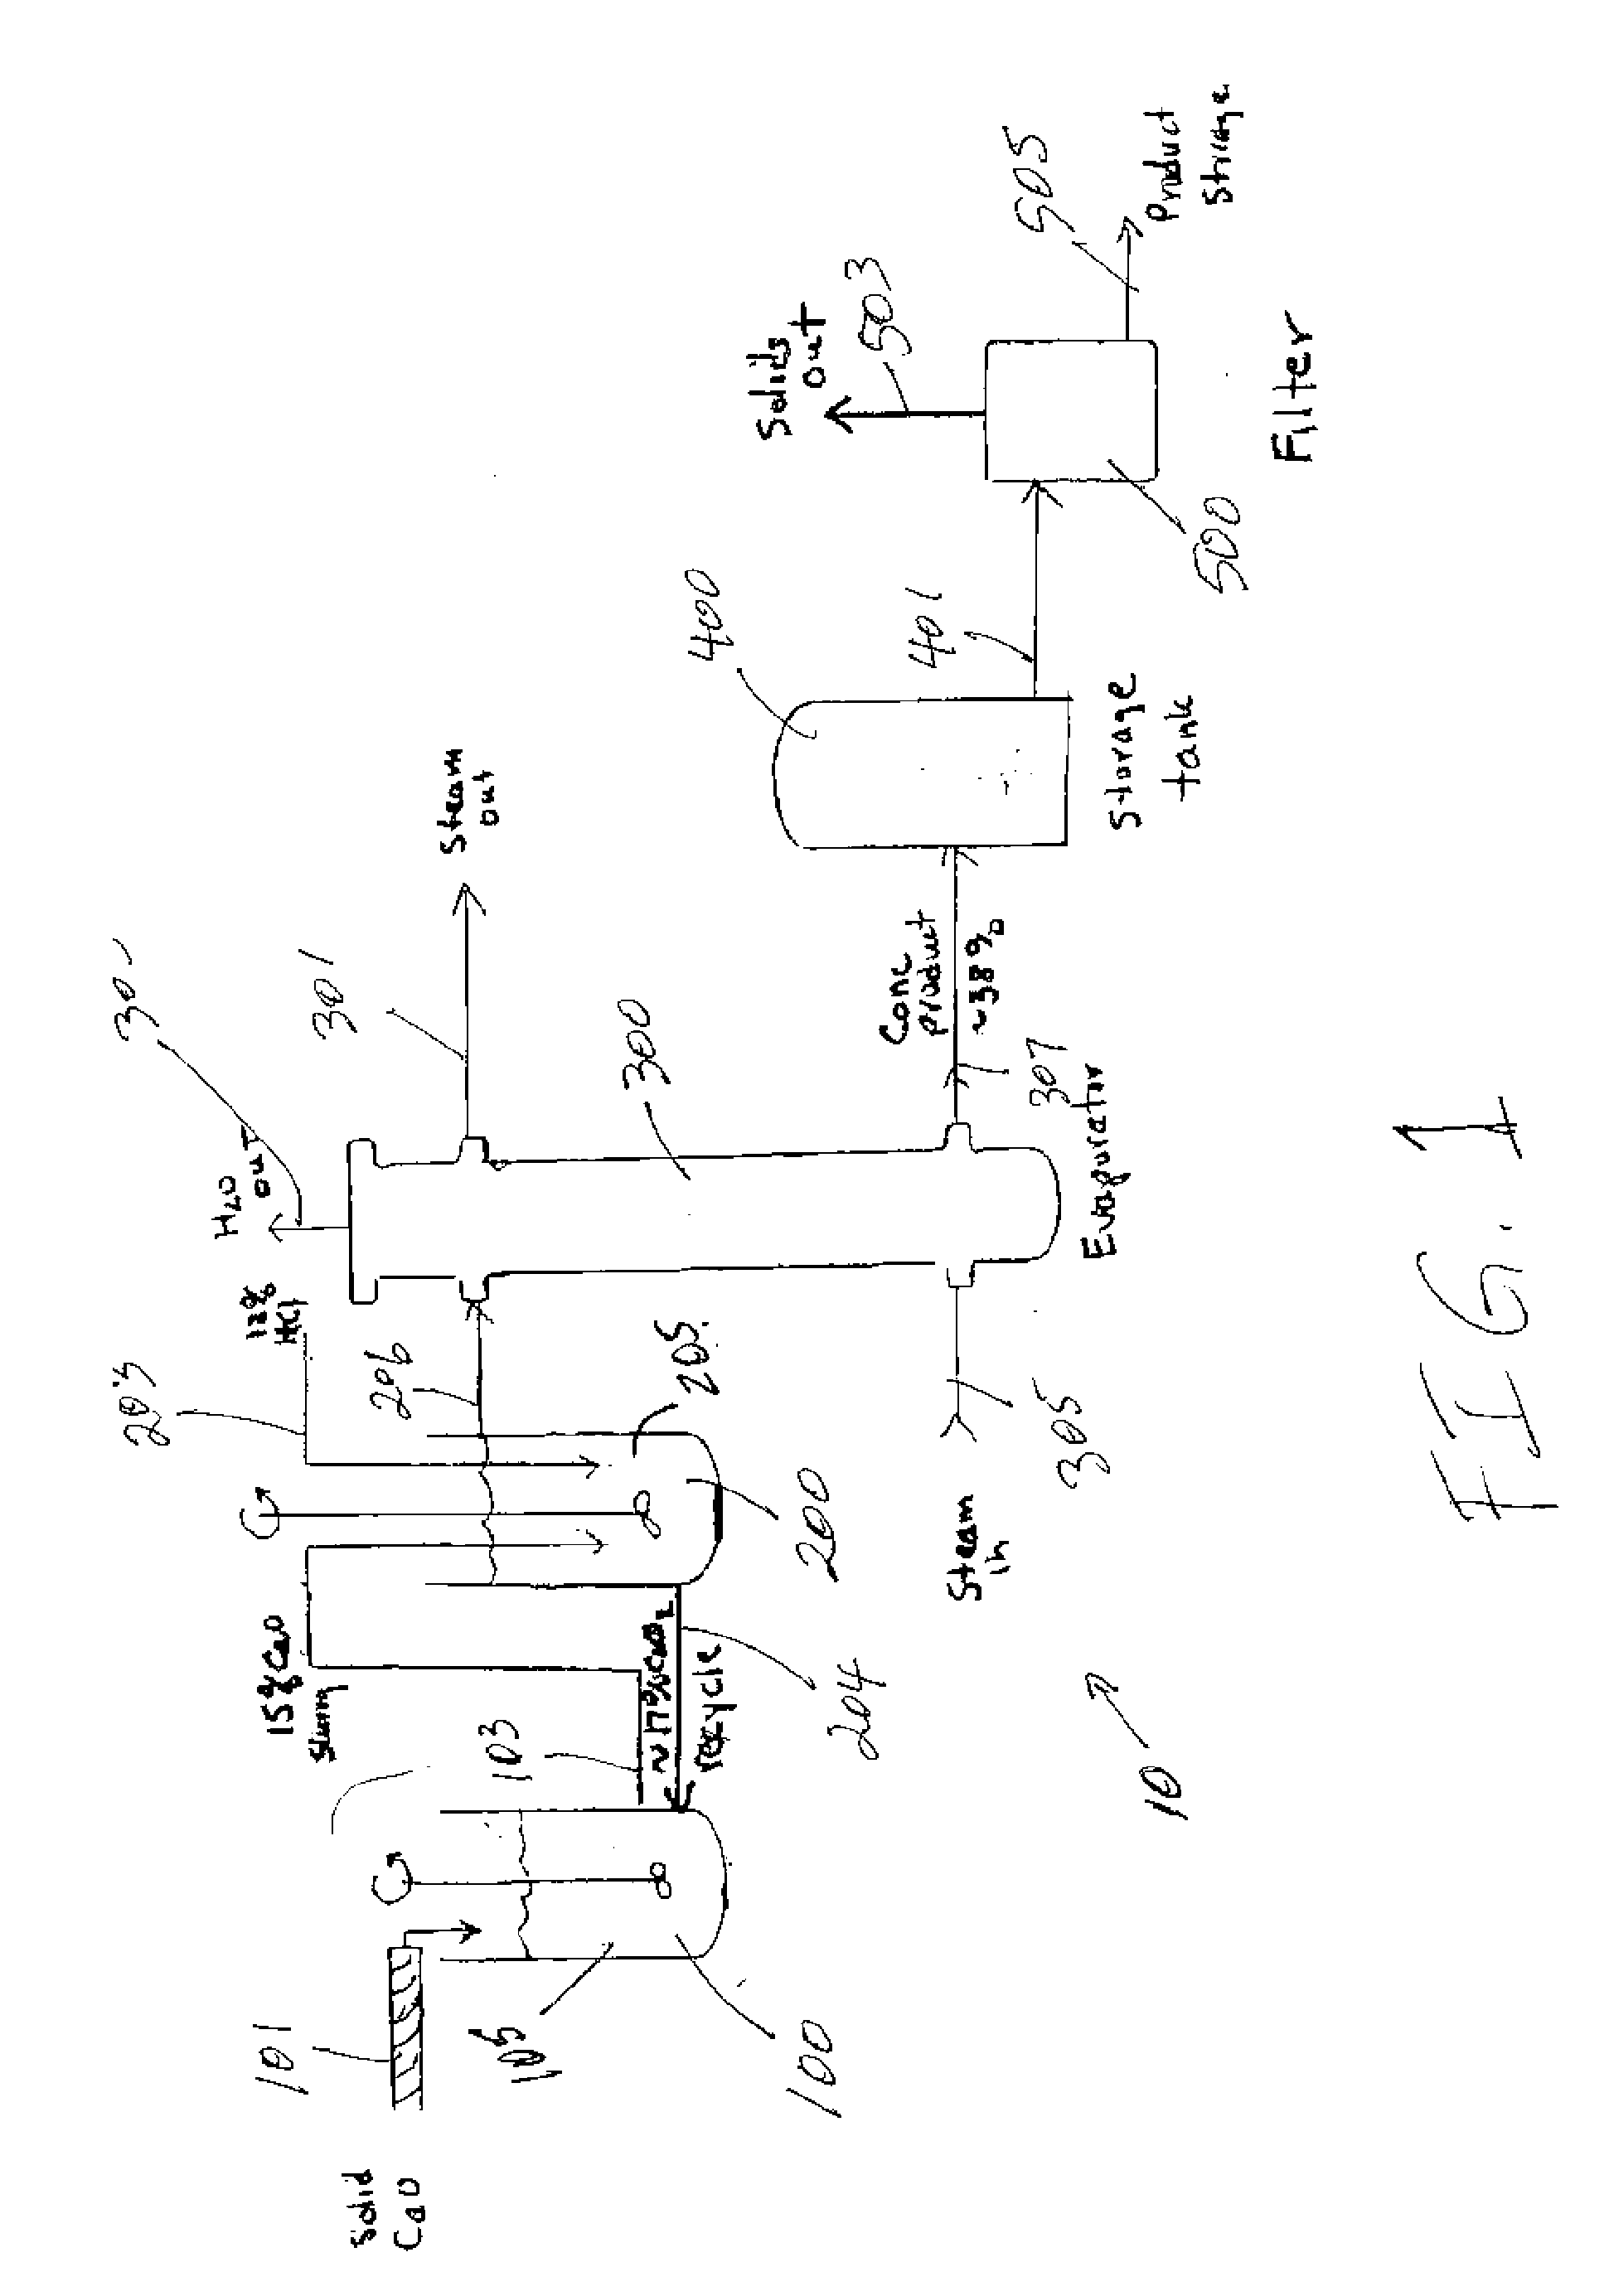 Apparatus and Methods For Producing Calcium Chloride, and Compositions and Products Made Therefrom